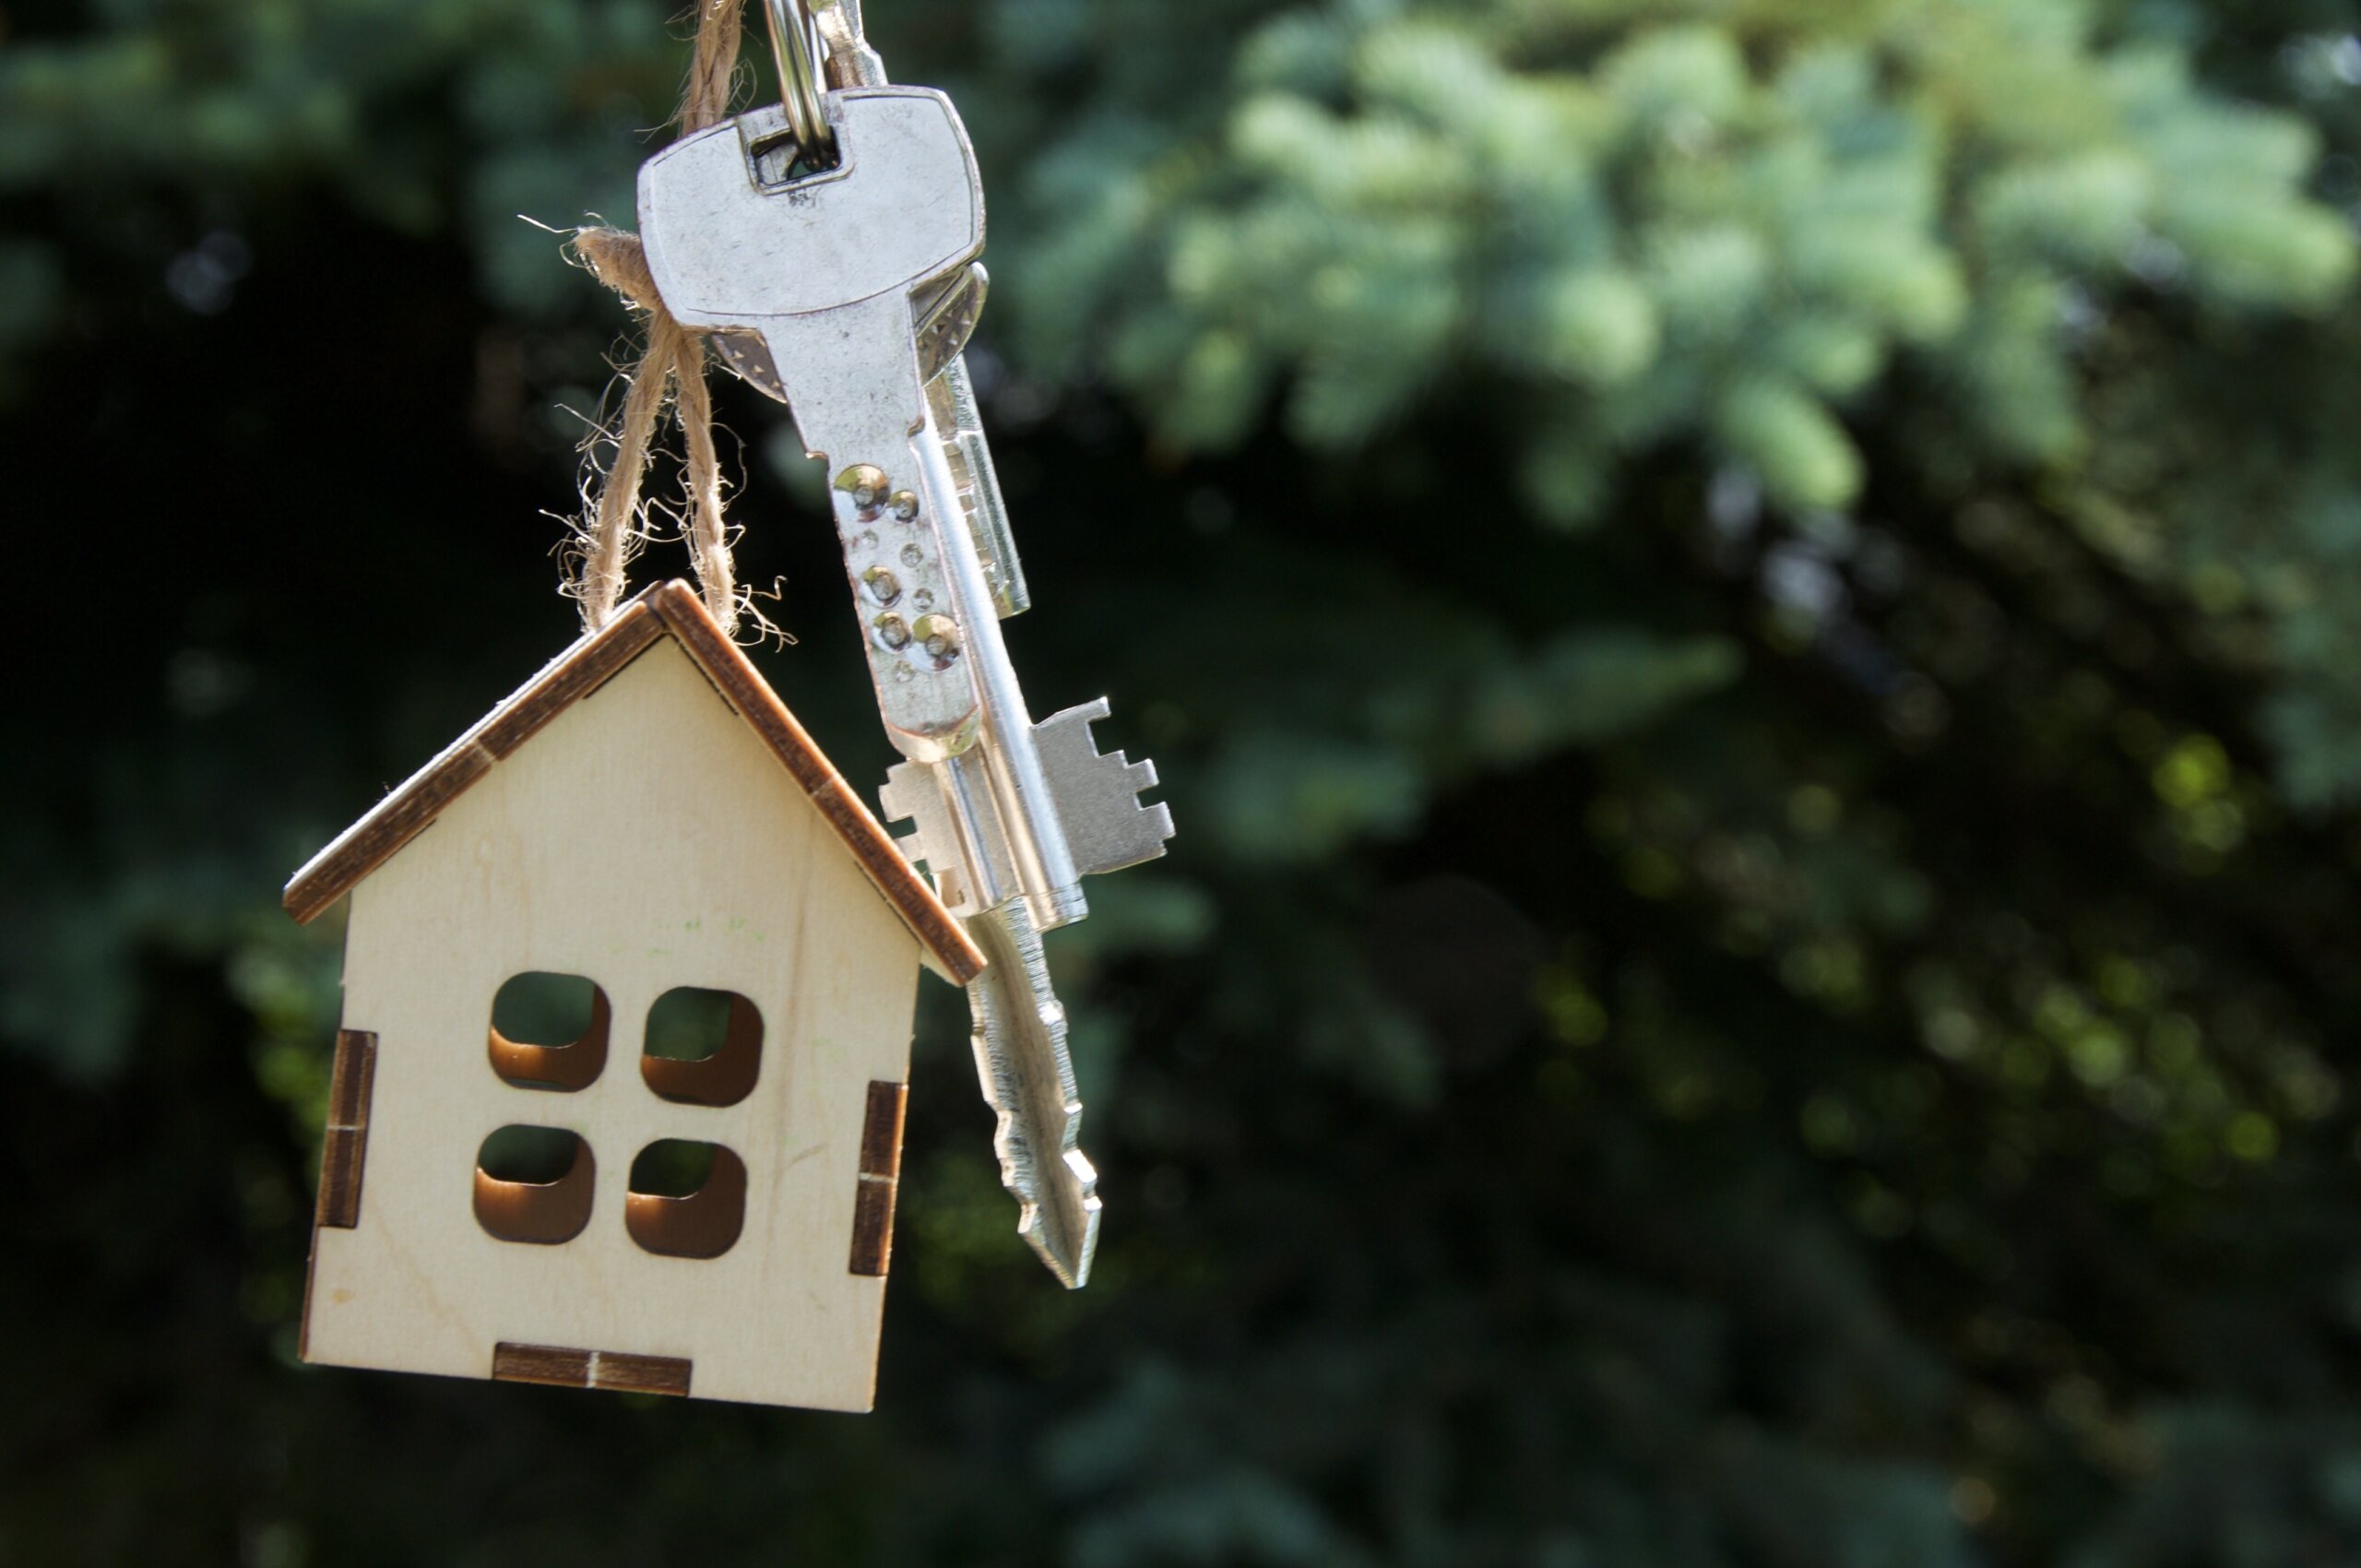 an image of a toy house and keys in front of a green background